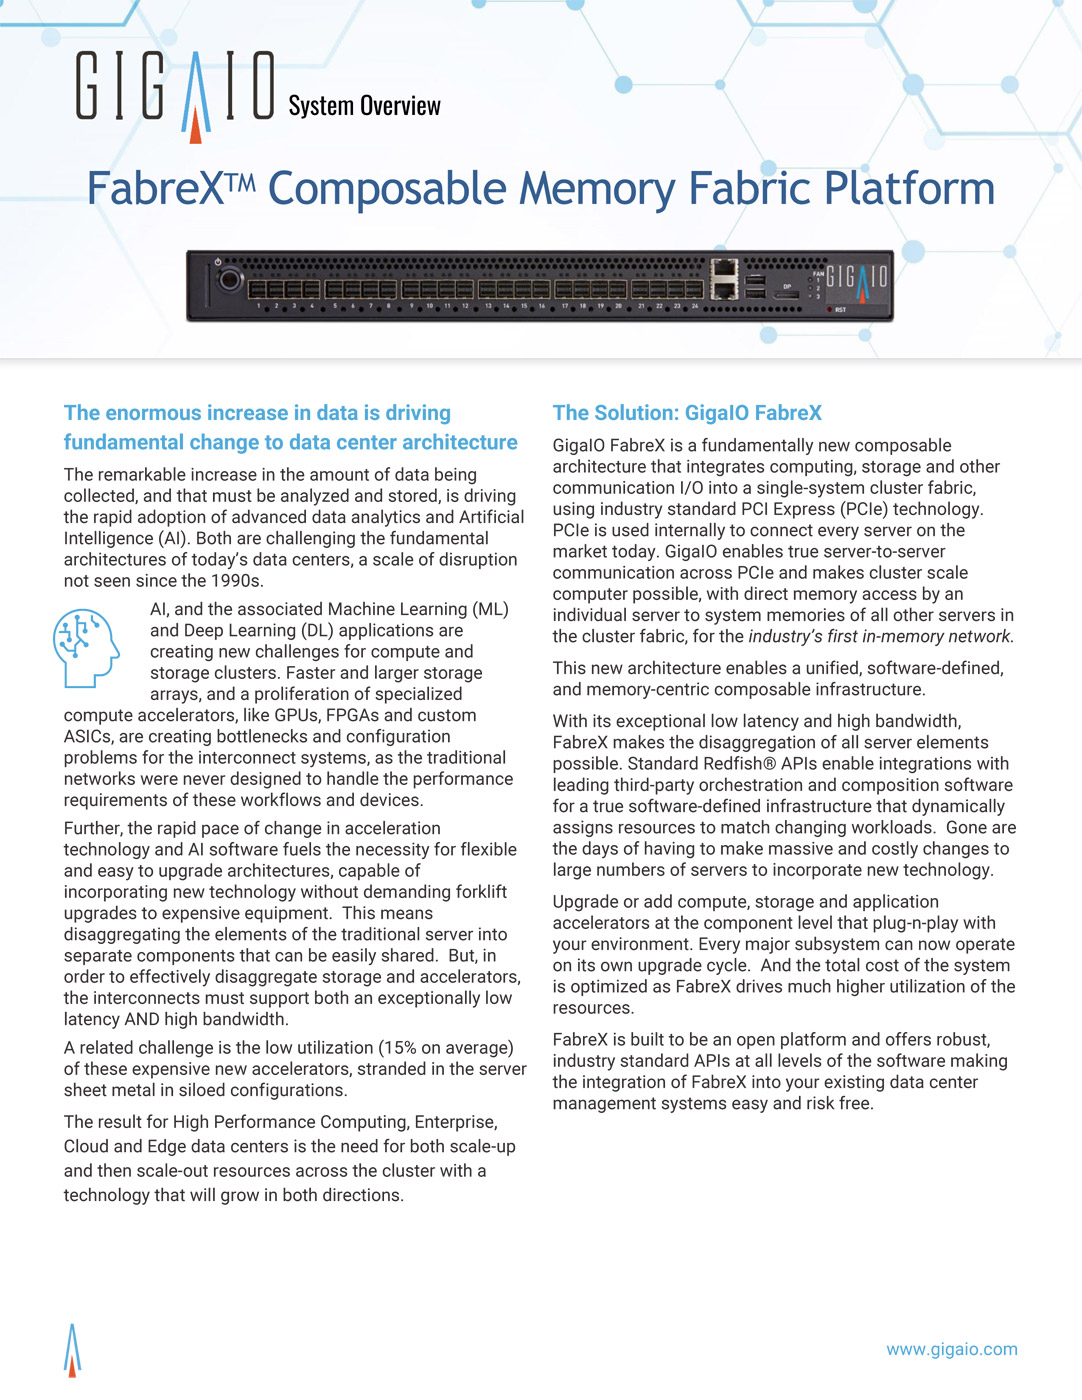 GigaIO FabreX Composable Memory Fabric Platform System Overview